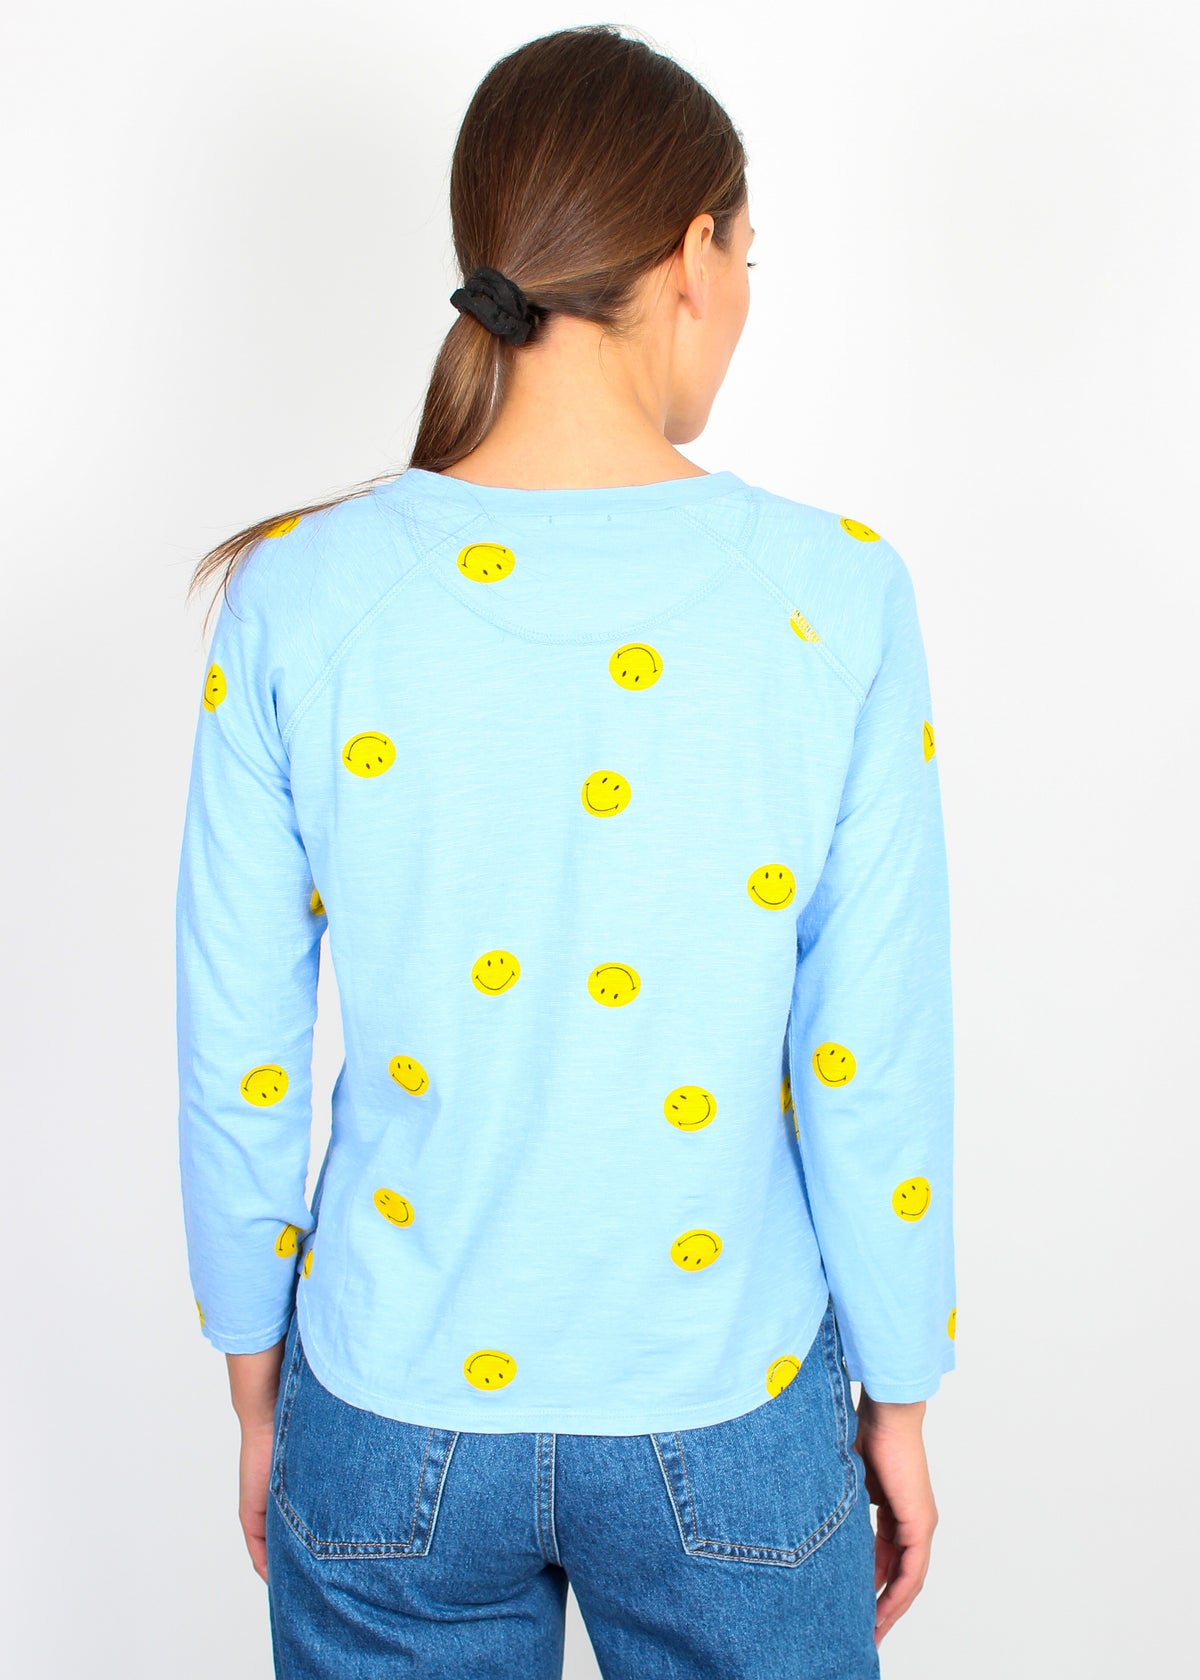 JU All Over Smiley Long Sleeve T-shirt in Blue